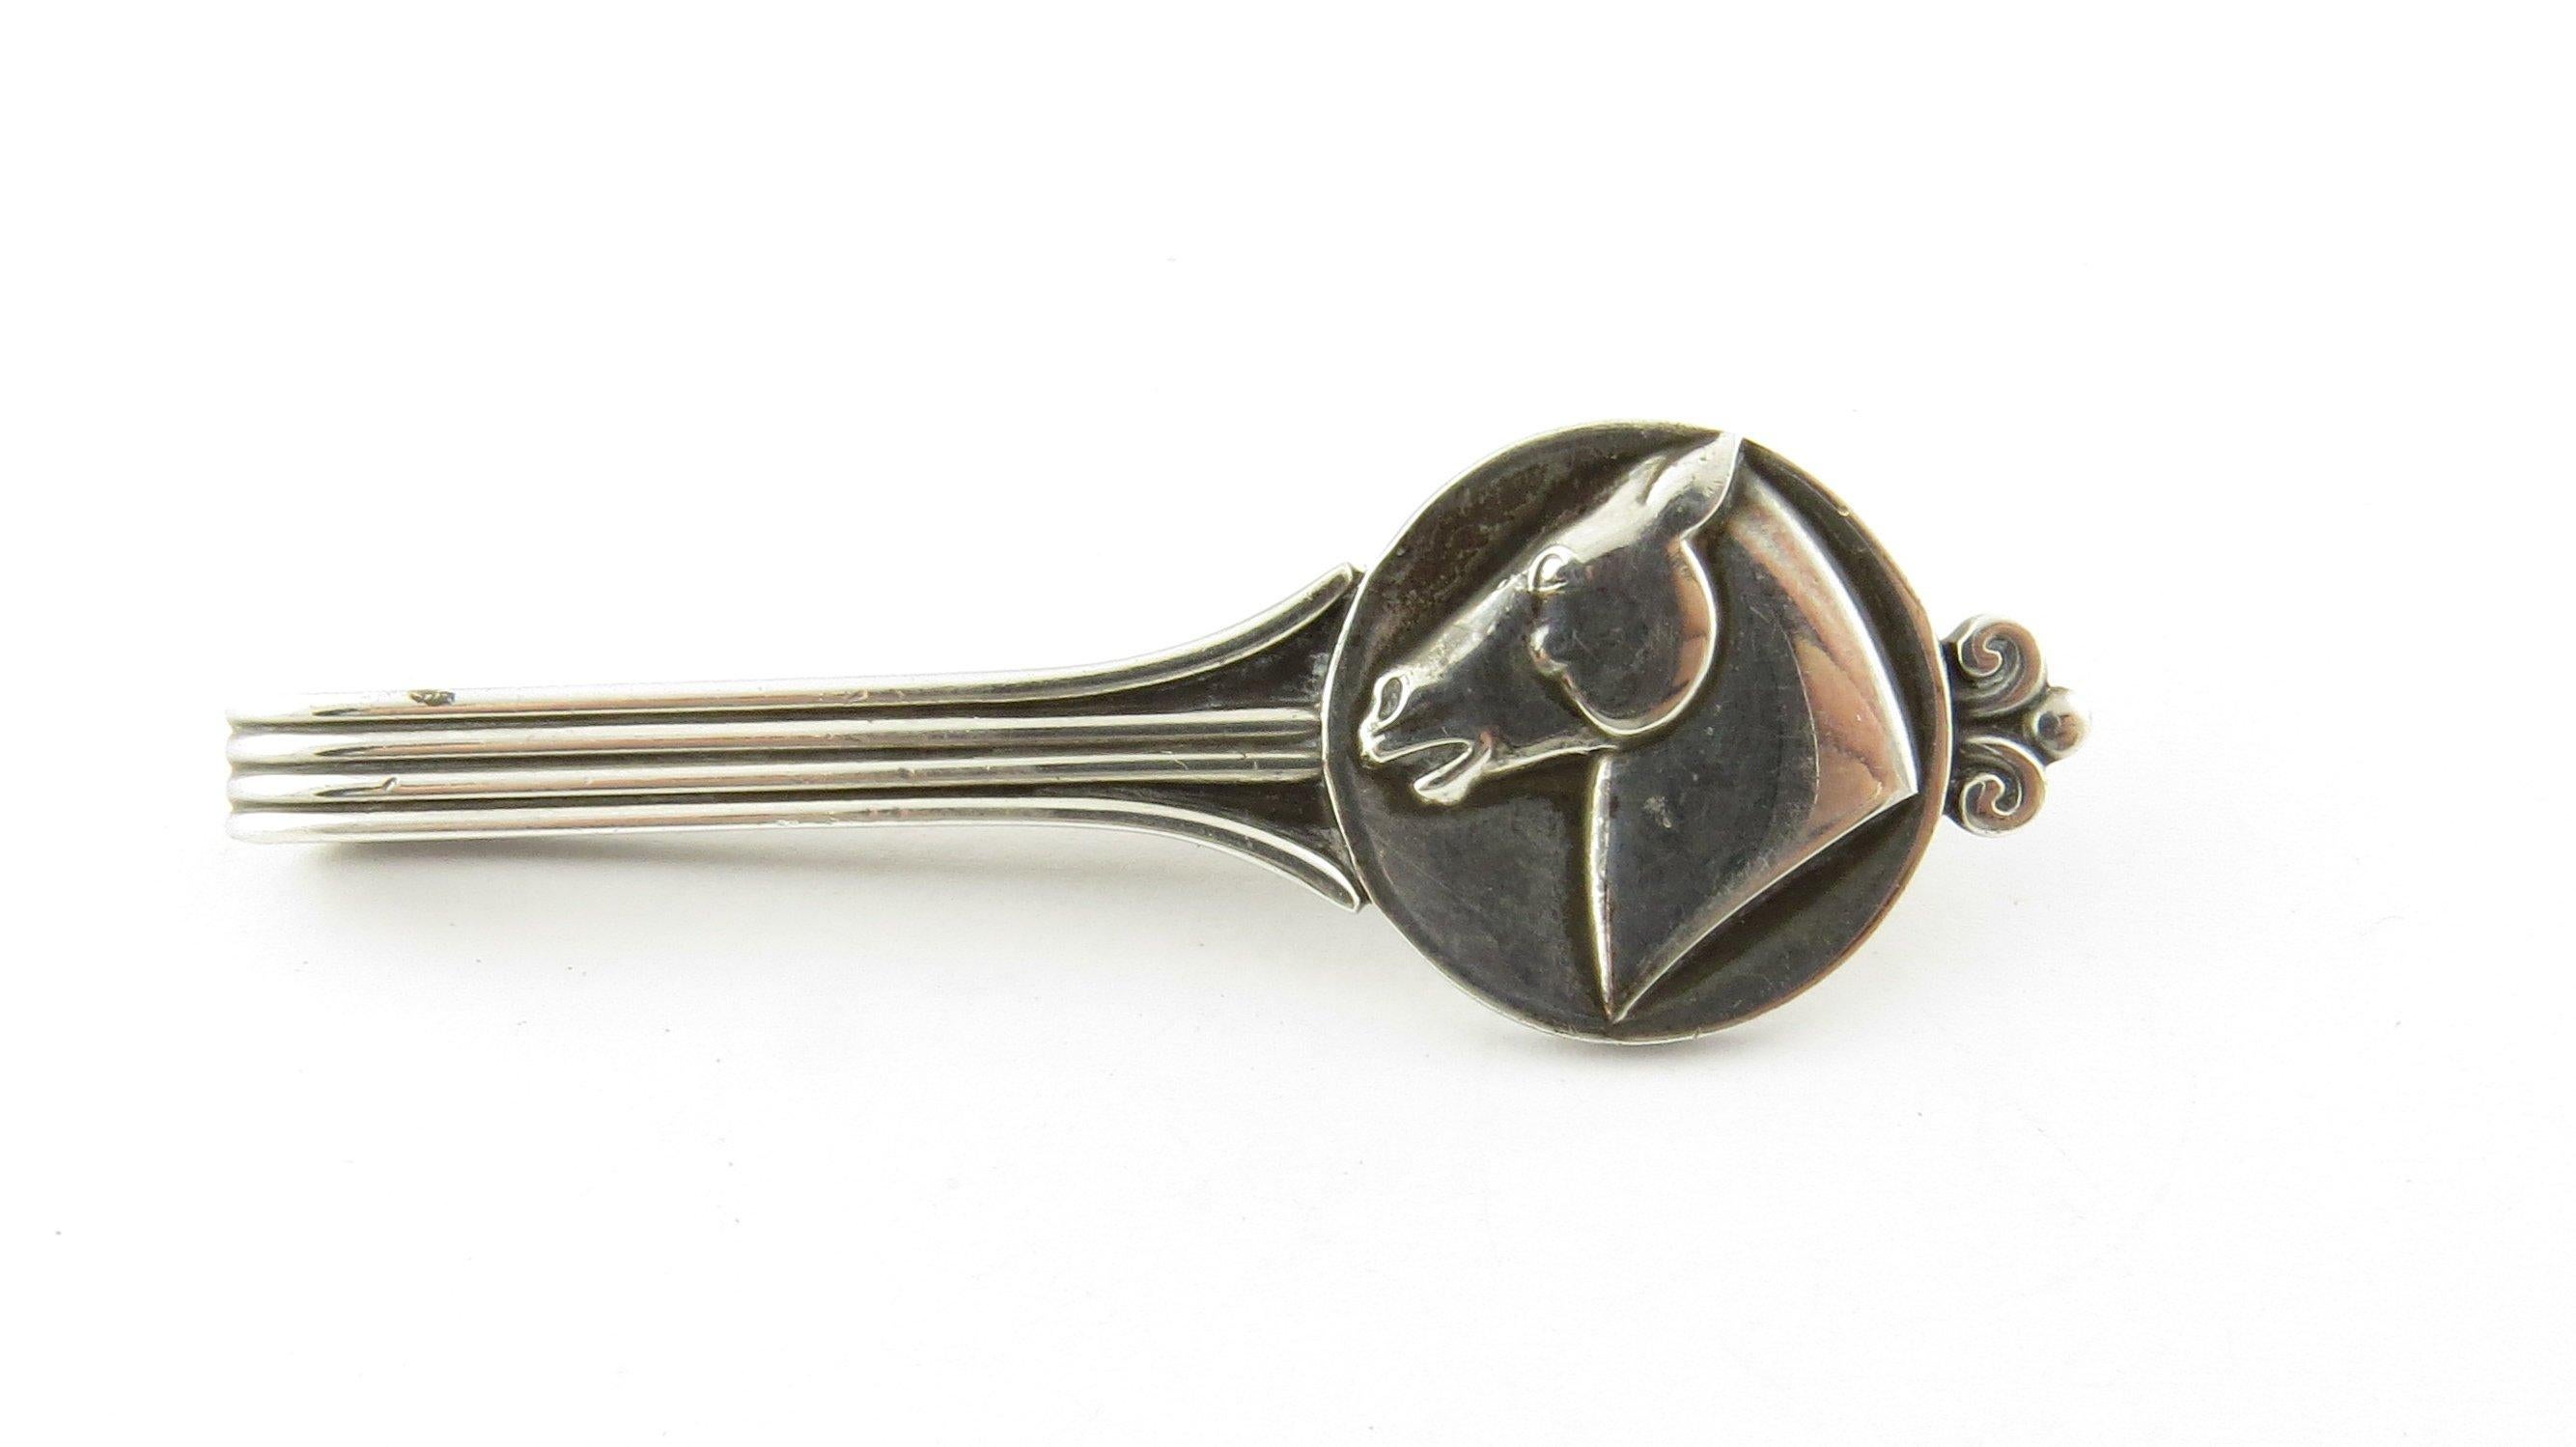 Vintage Georg Jensen Denmark Sterling Silver Horsehead Tie Bar #65- This elegant tie bar by Georg Jensen features a proud horse head in profile crafted in classic sterling silver. Size: 56 mm x 18 mm Weight: 6.1 dwt. / 9.5 gr. Hallmark: GEORG JENSEN